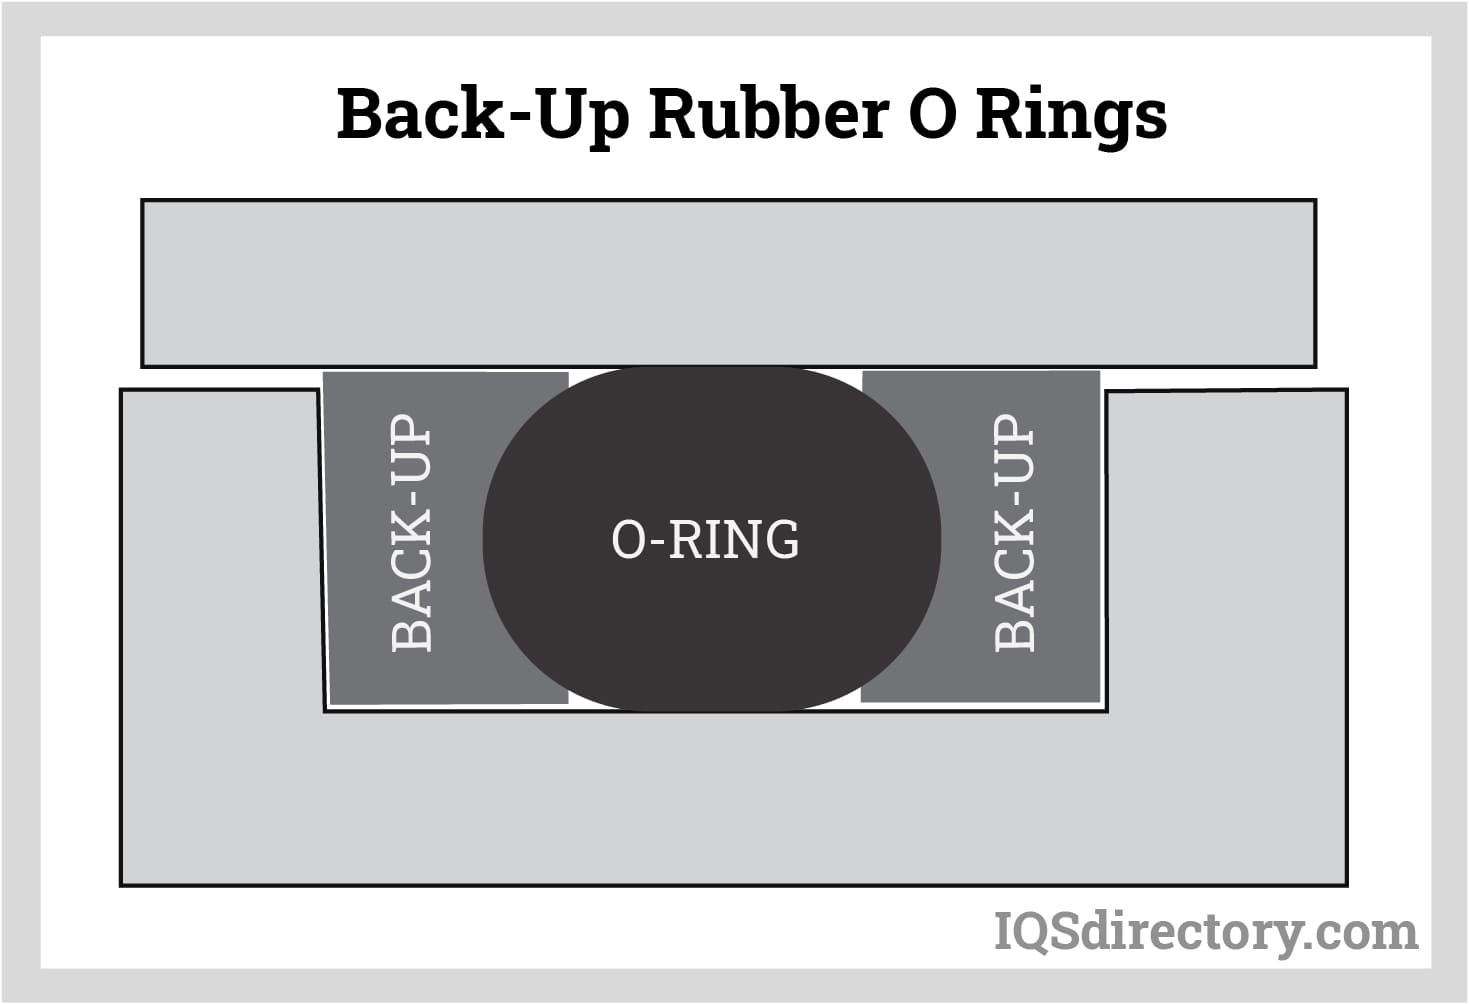 Back-Up Rubber O Rings